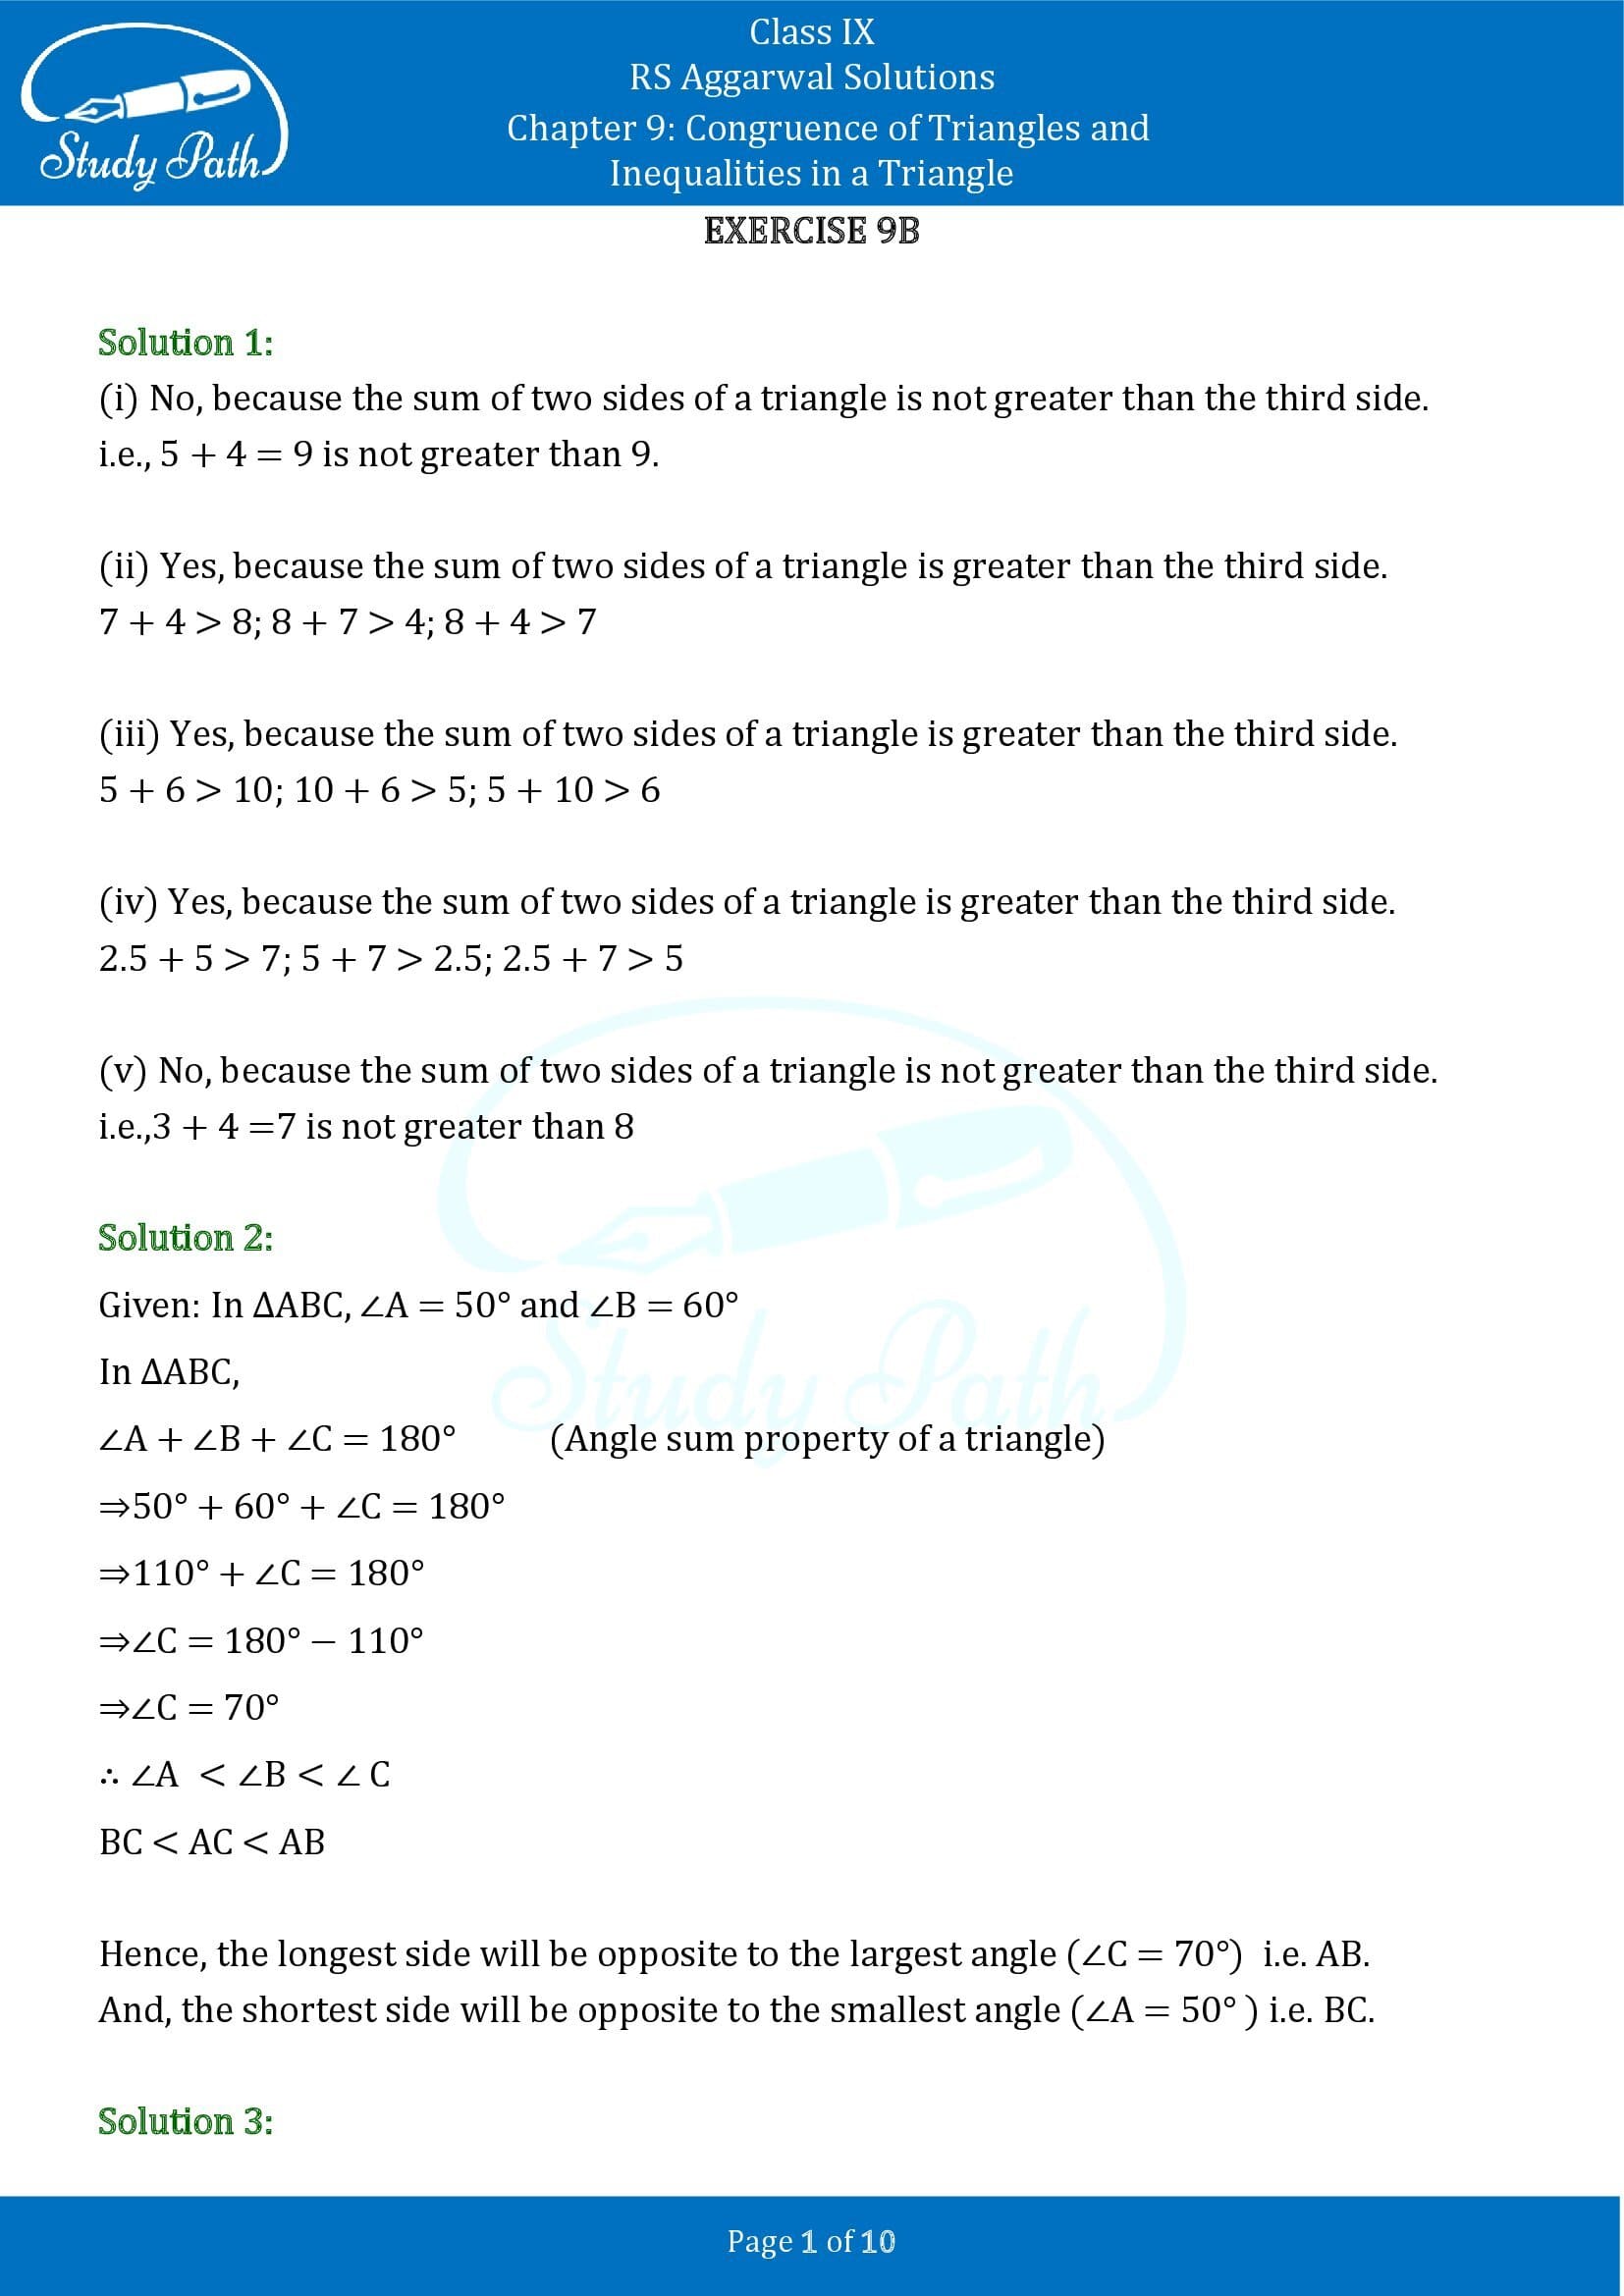 RS Aggarwal Solutions Class 9 Chapter 9 Congruence of Triangles and Inequalities in a Triangle Exercise 9B 0001